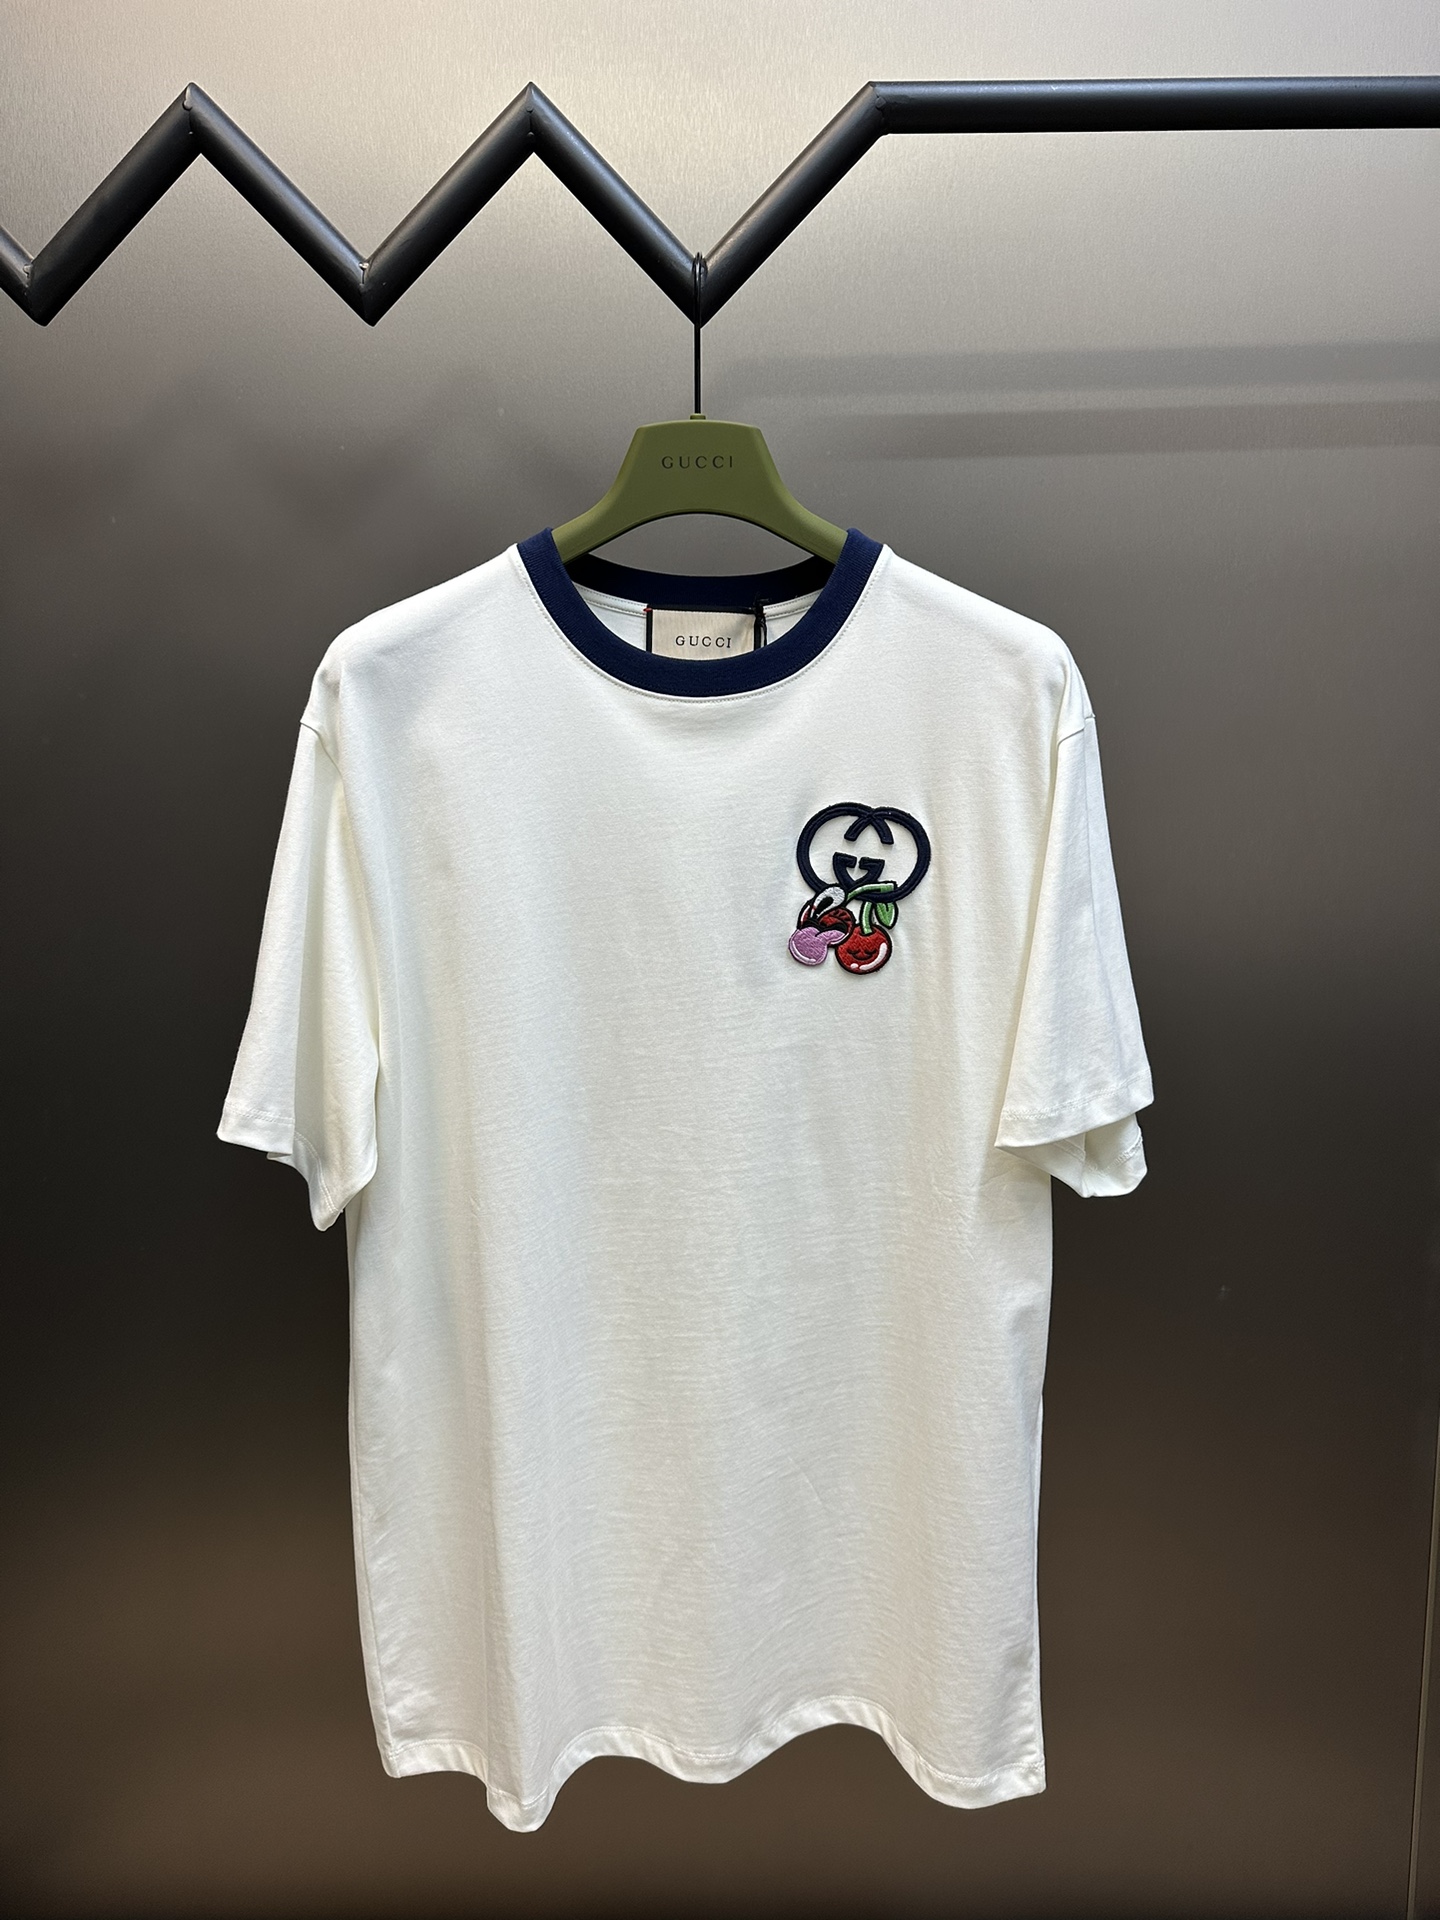 Gucci Clothing T-Shirt Embroidery Unisex Cotton Short Sleeve